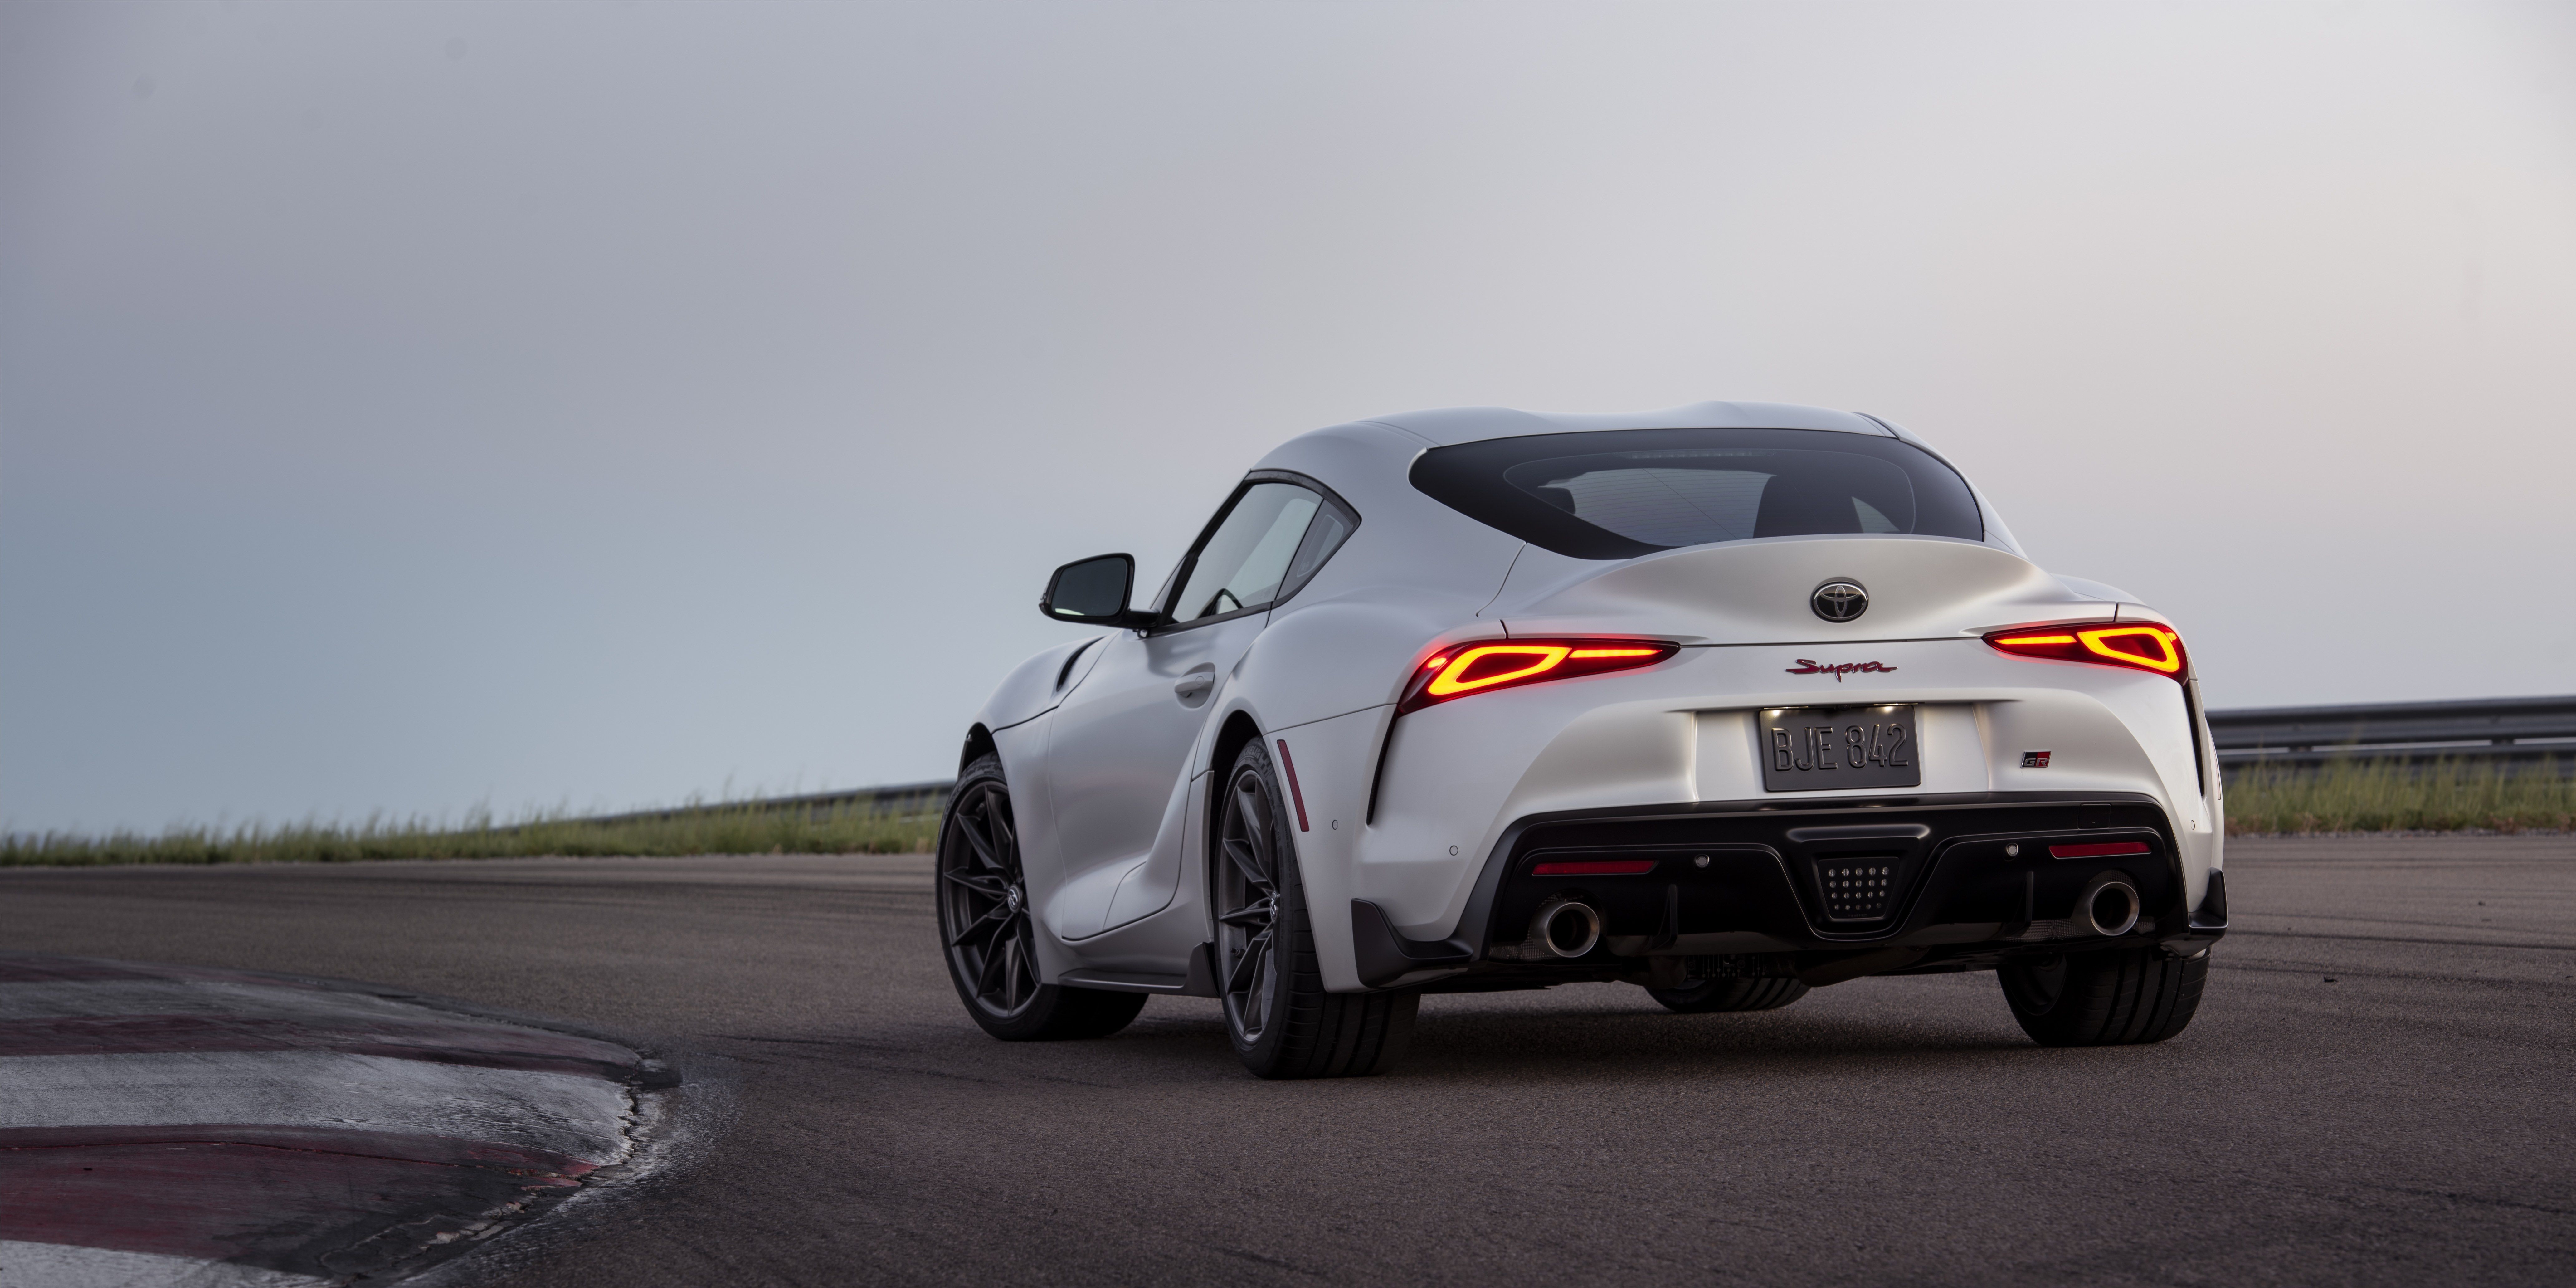 The Toyota Supra's New Manual Transmission Transforms the Car